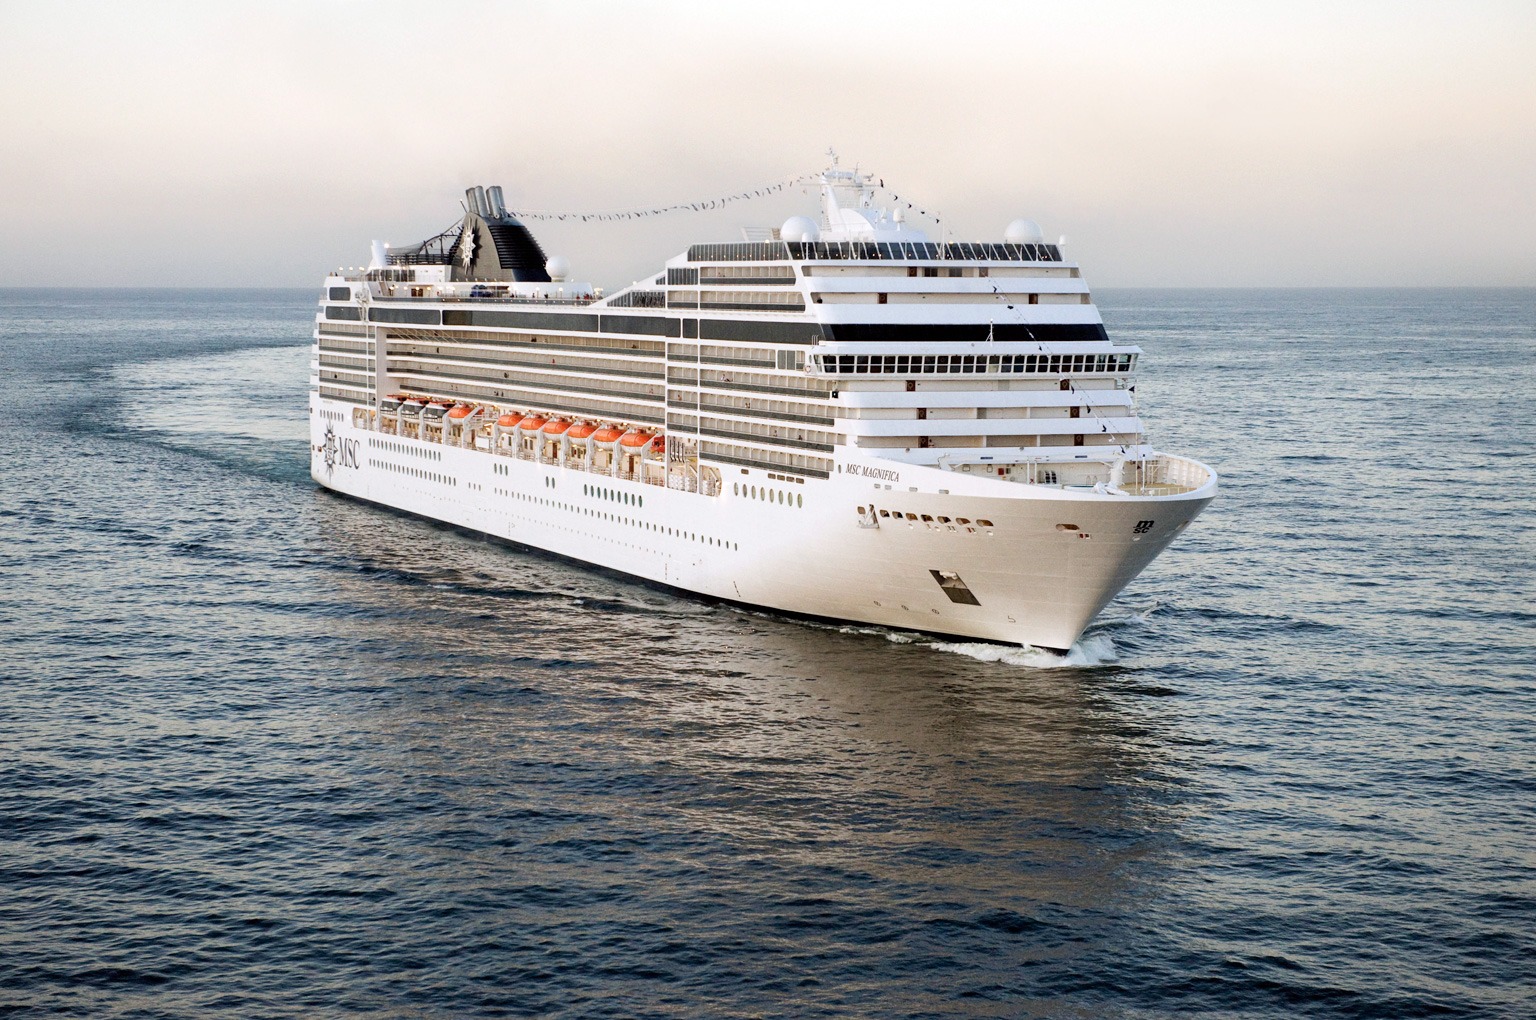 MSC Magnifica Cruise Ship All Reviews & Images